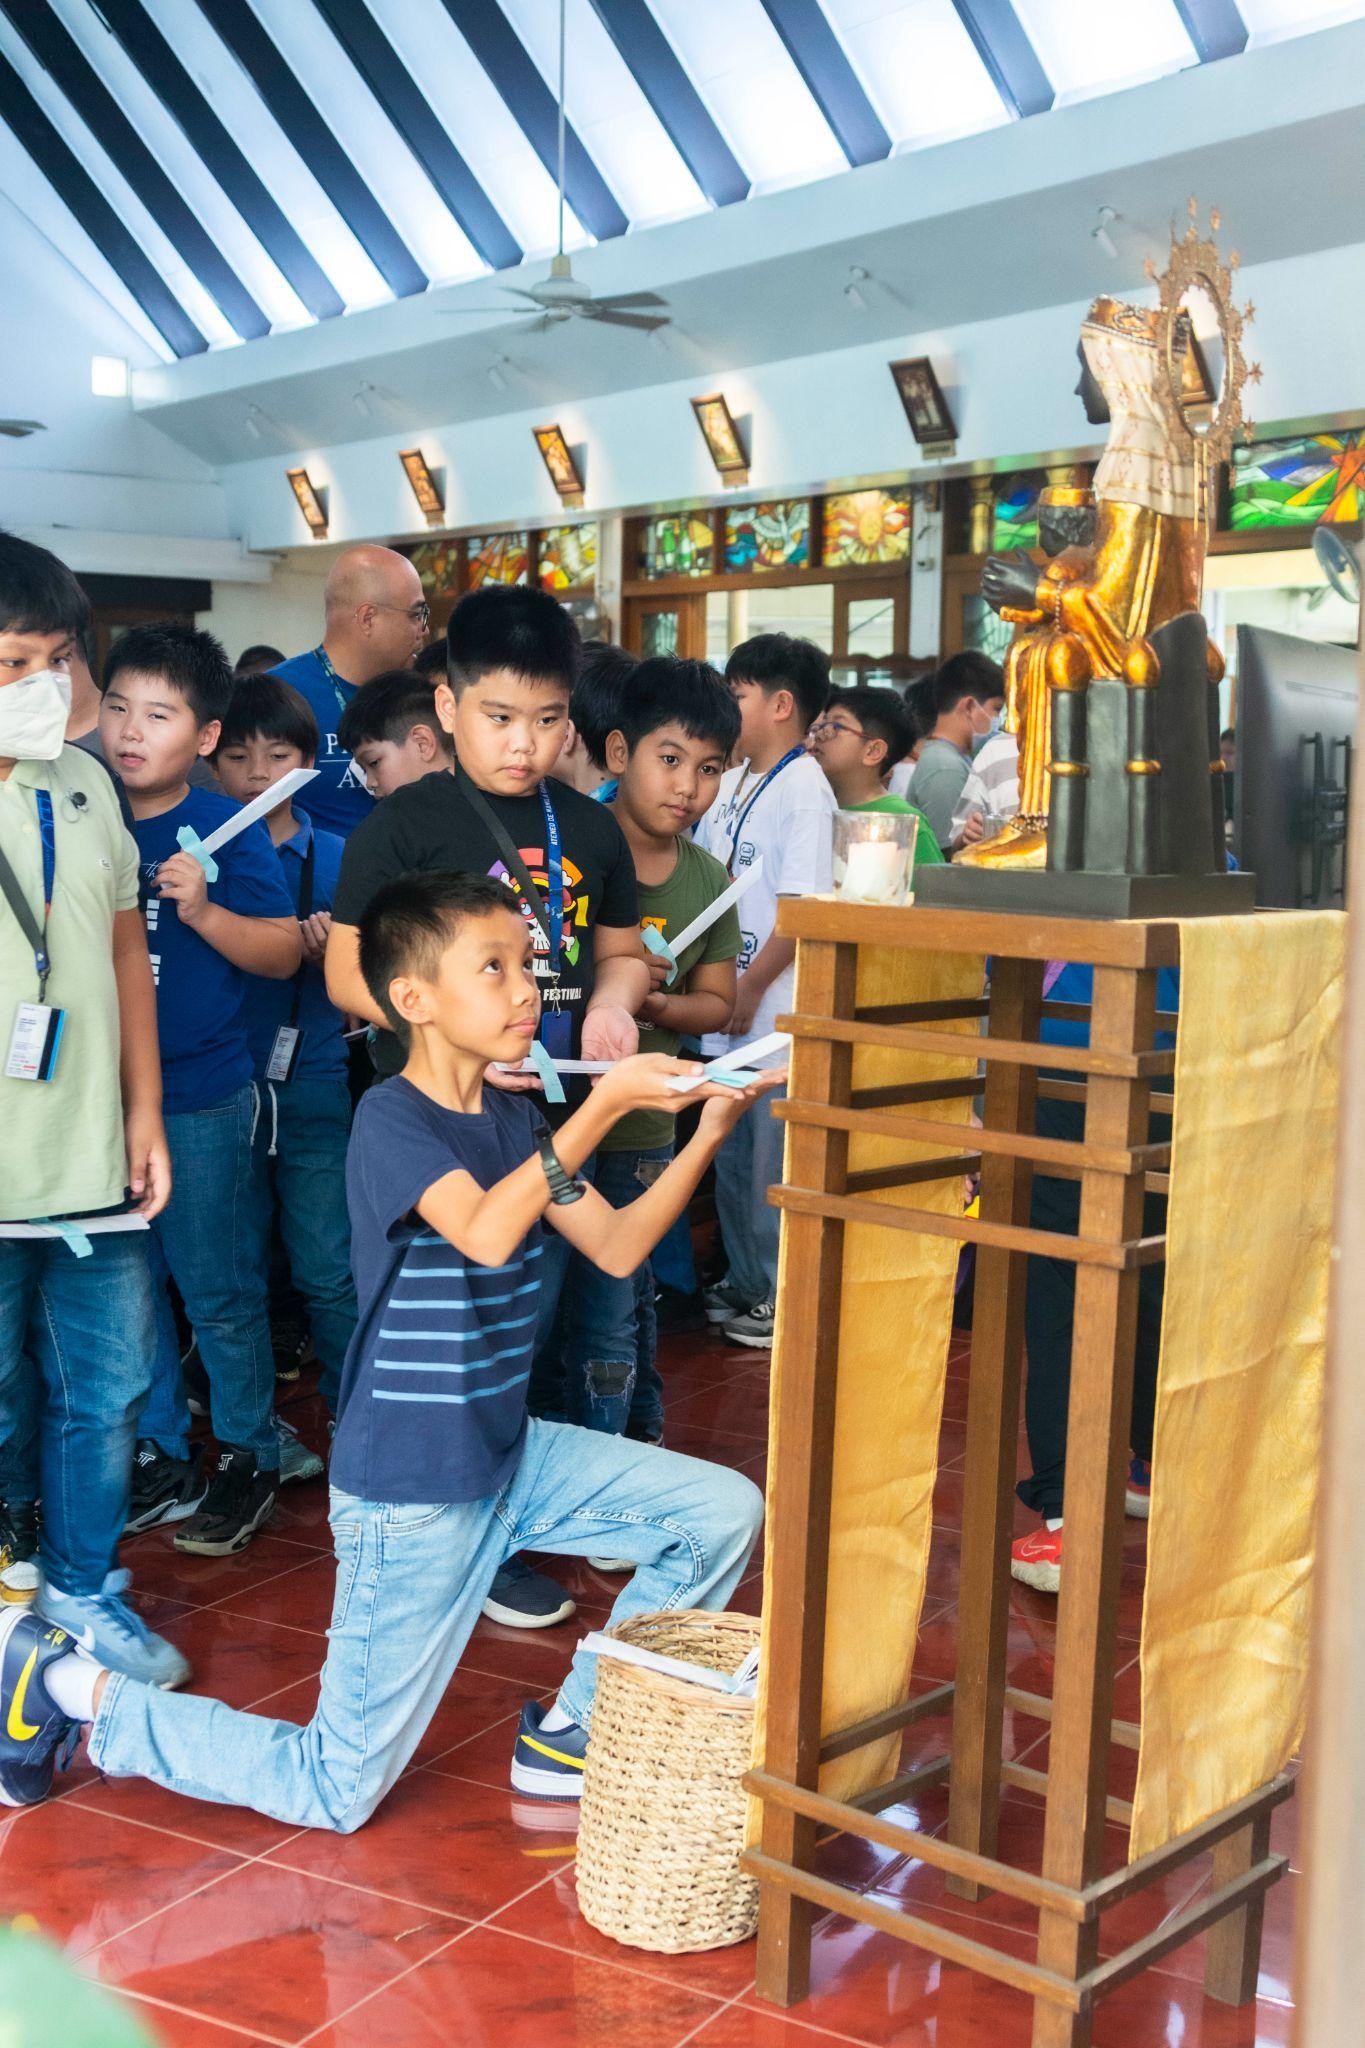 A grade 4 Atenean re-enacts a pivotal moment from St Ignatius' life 